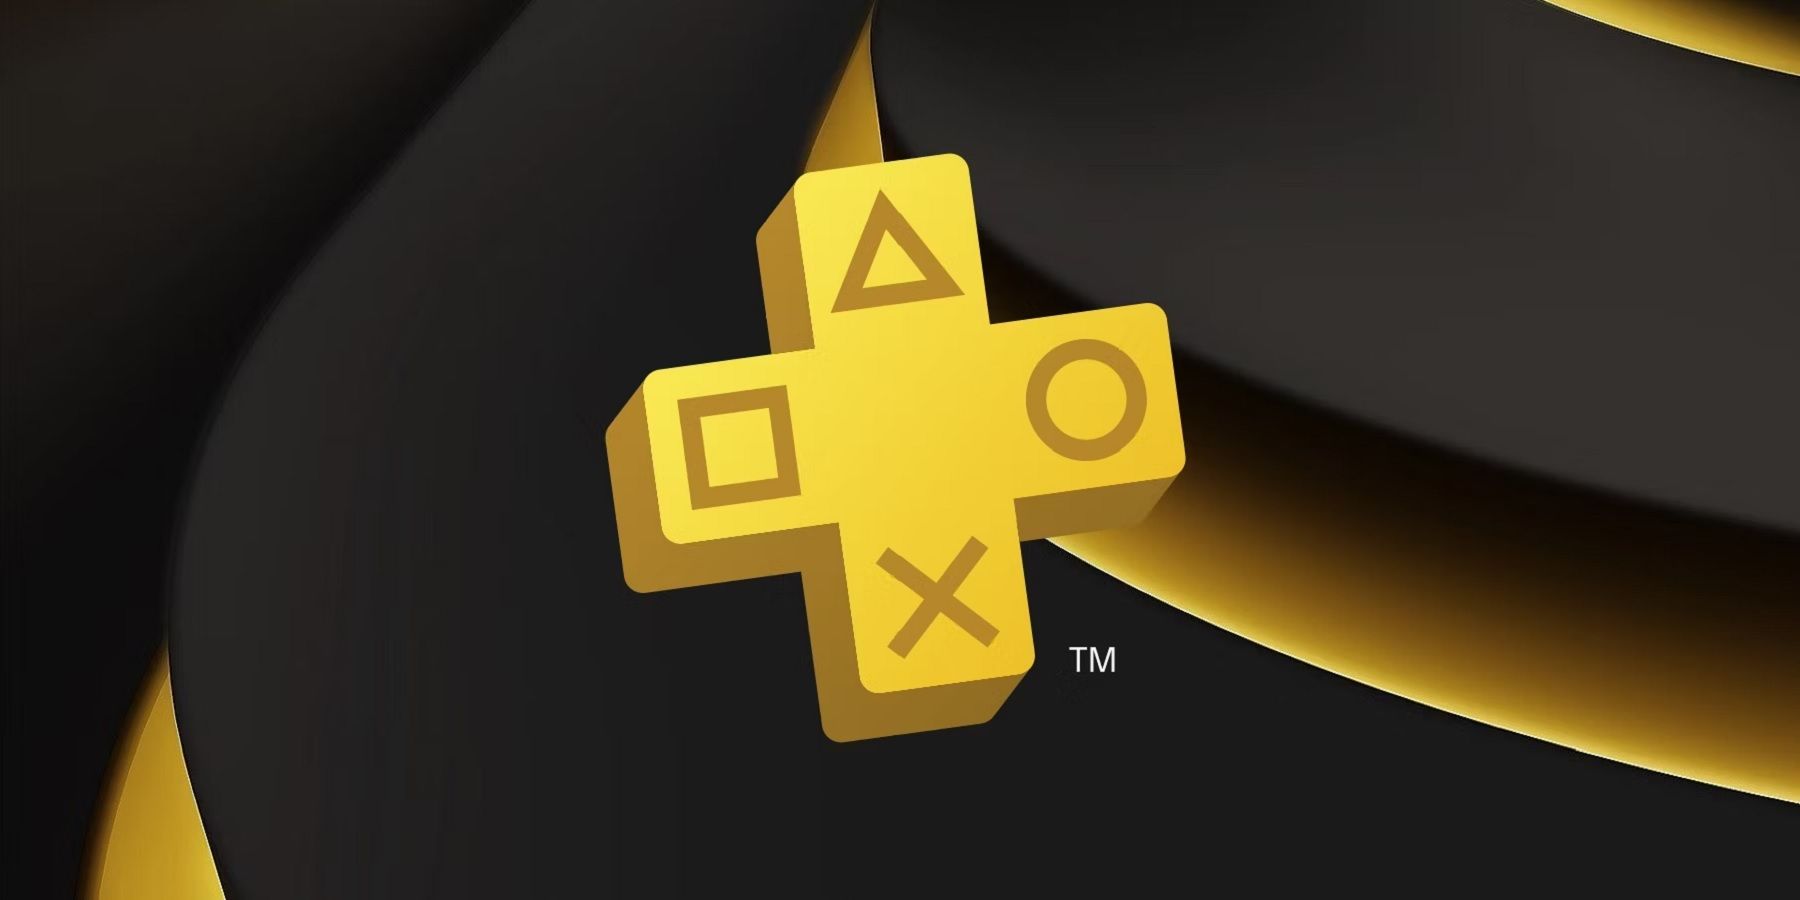 PlayStation 4 role-player Ys 8 removed from PS Plus Extra